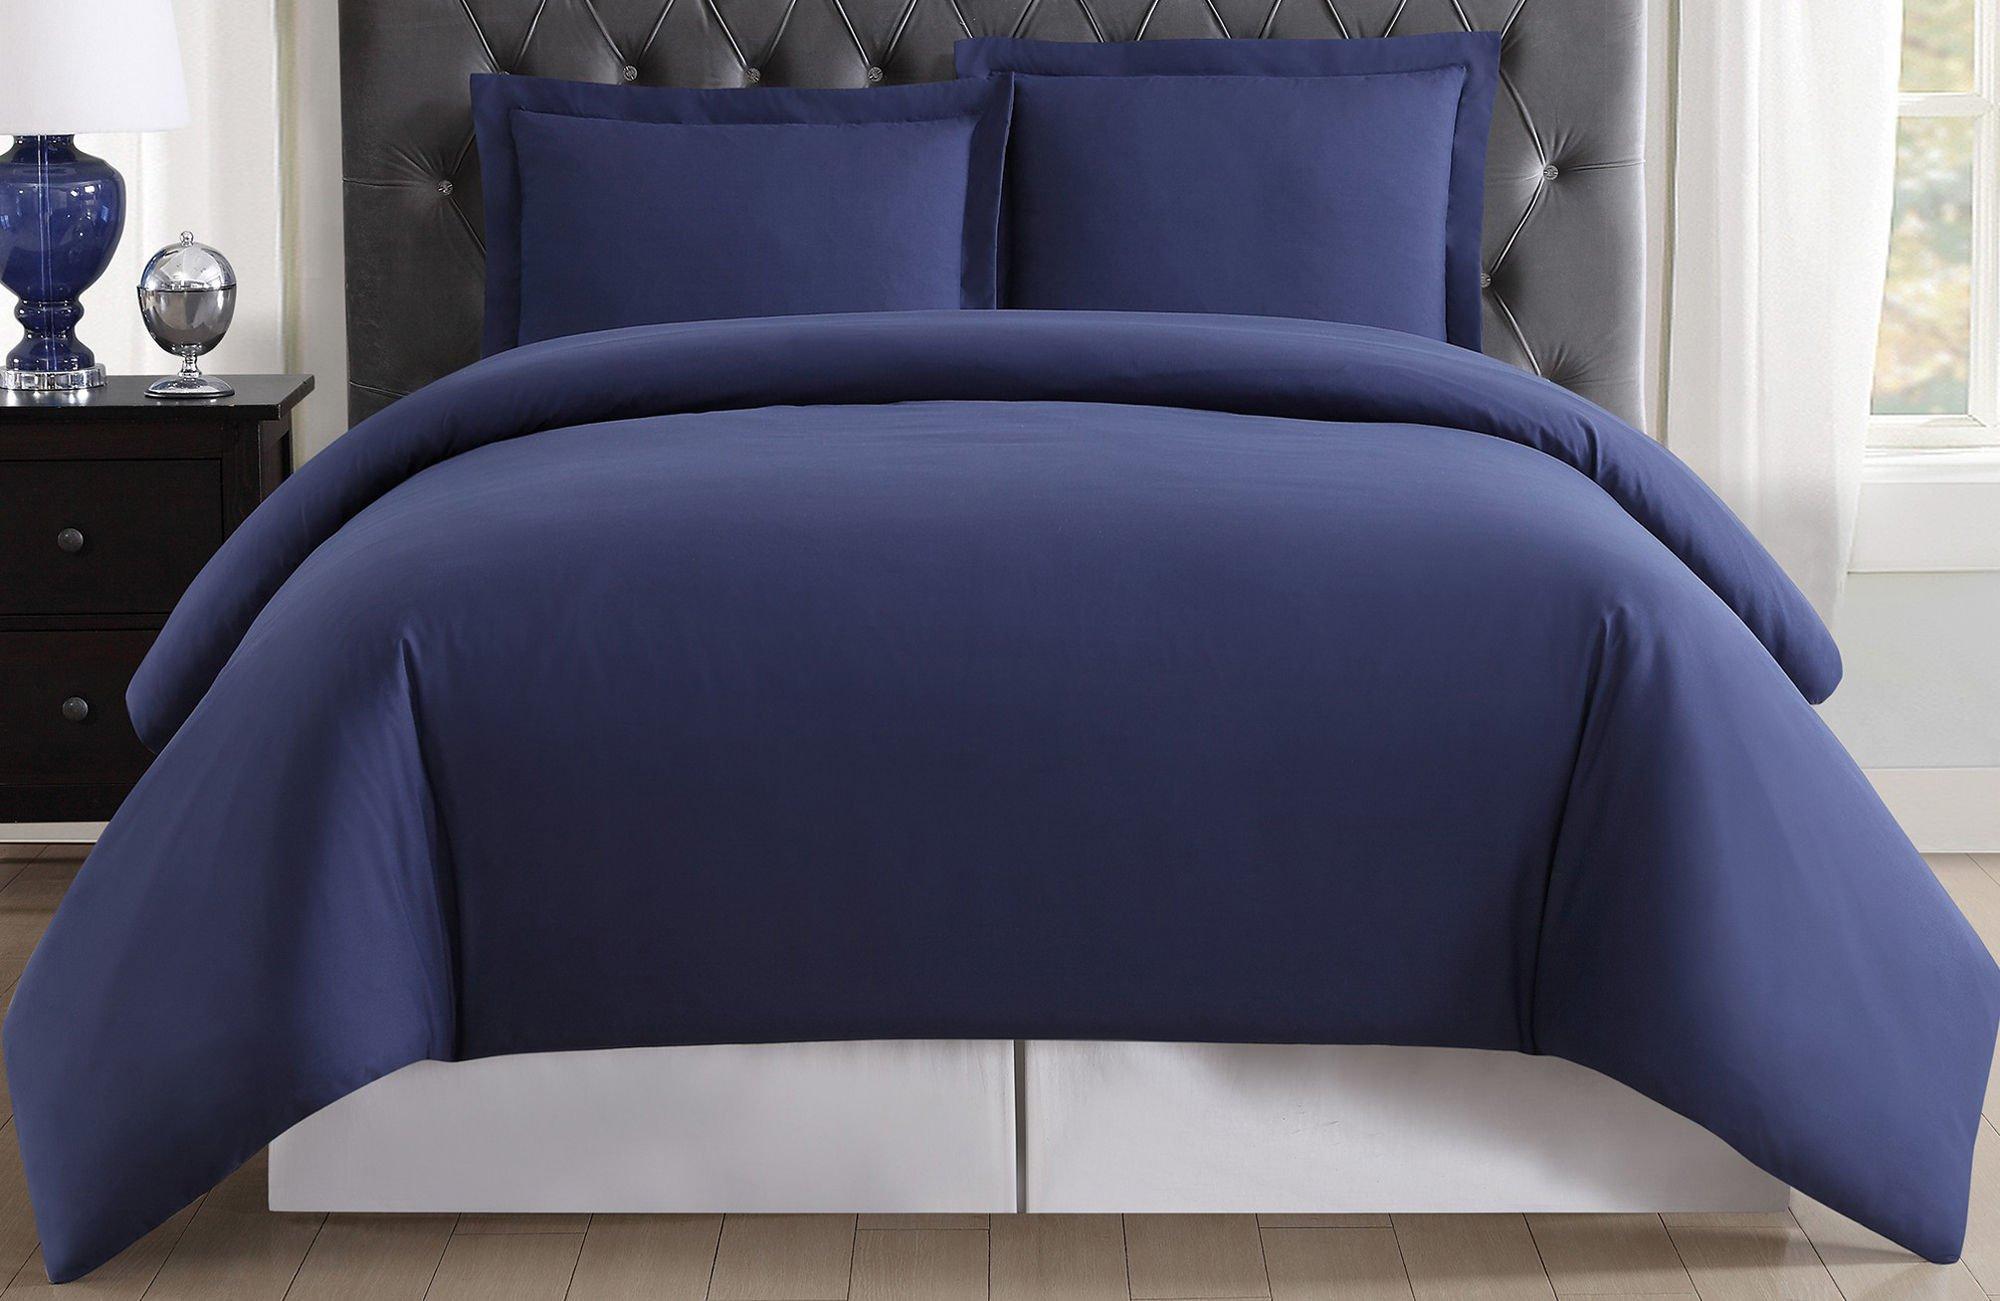 Photos - Bed Linen Truly Soft Everyday Solid Duvet Cover Set